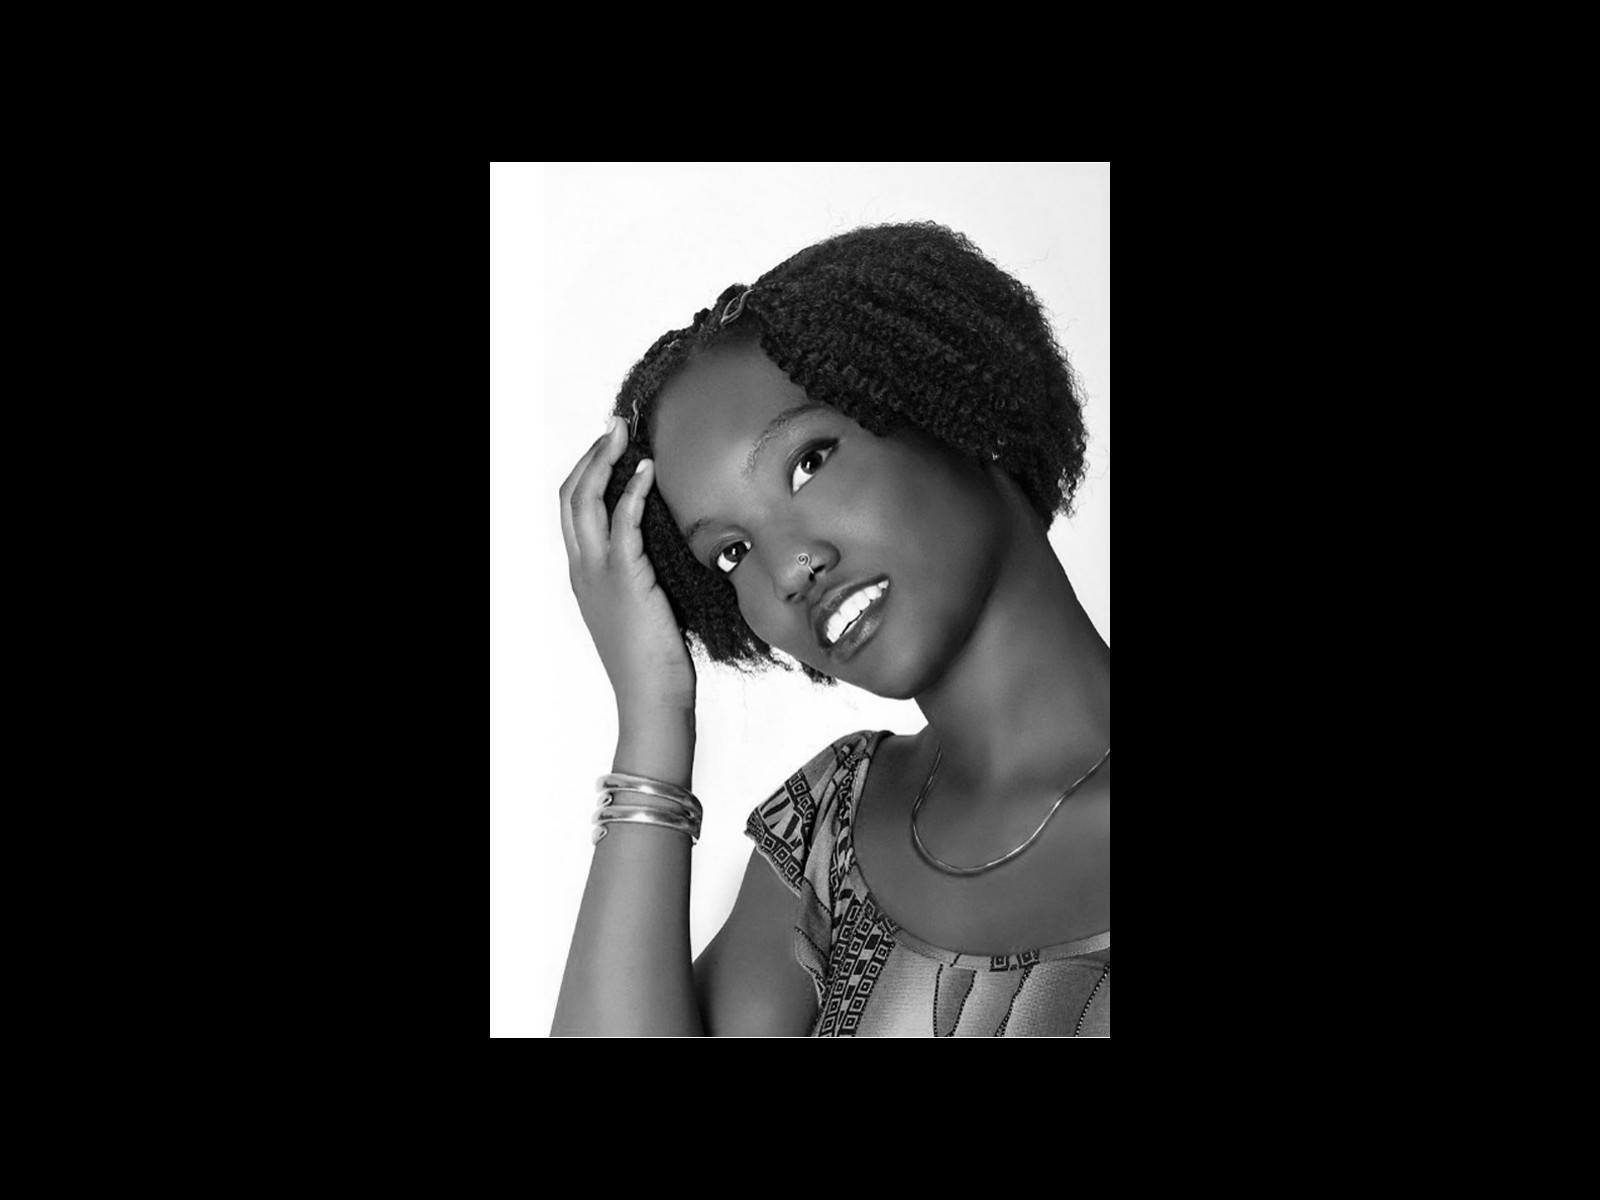 37-WEST-AFRICAN-MODEL-BW